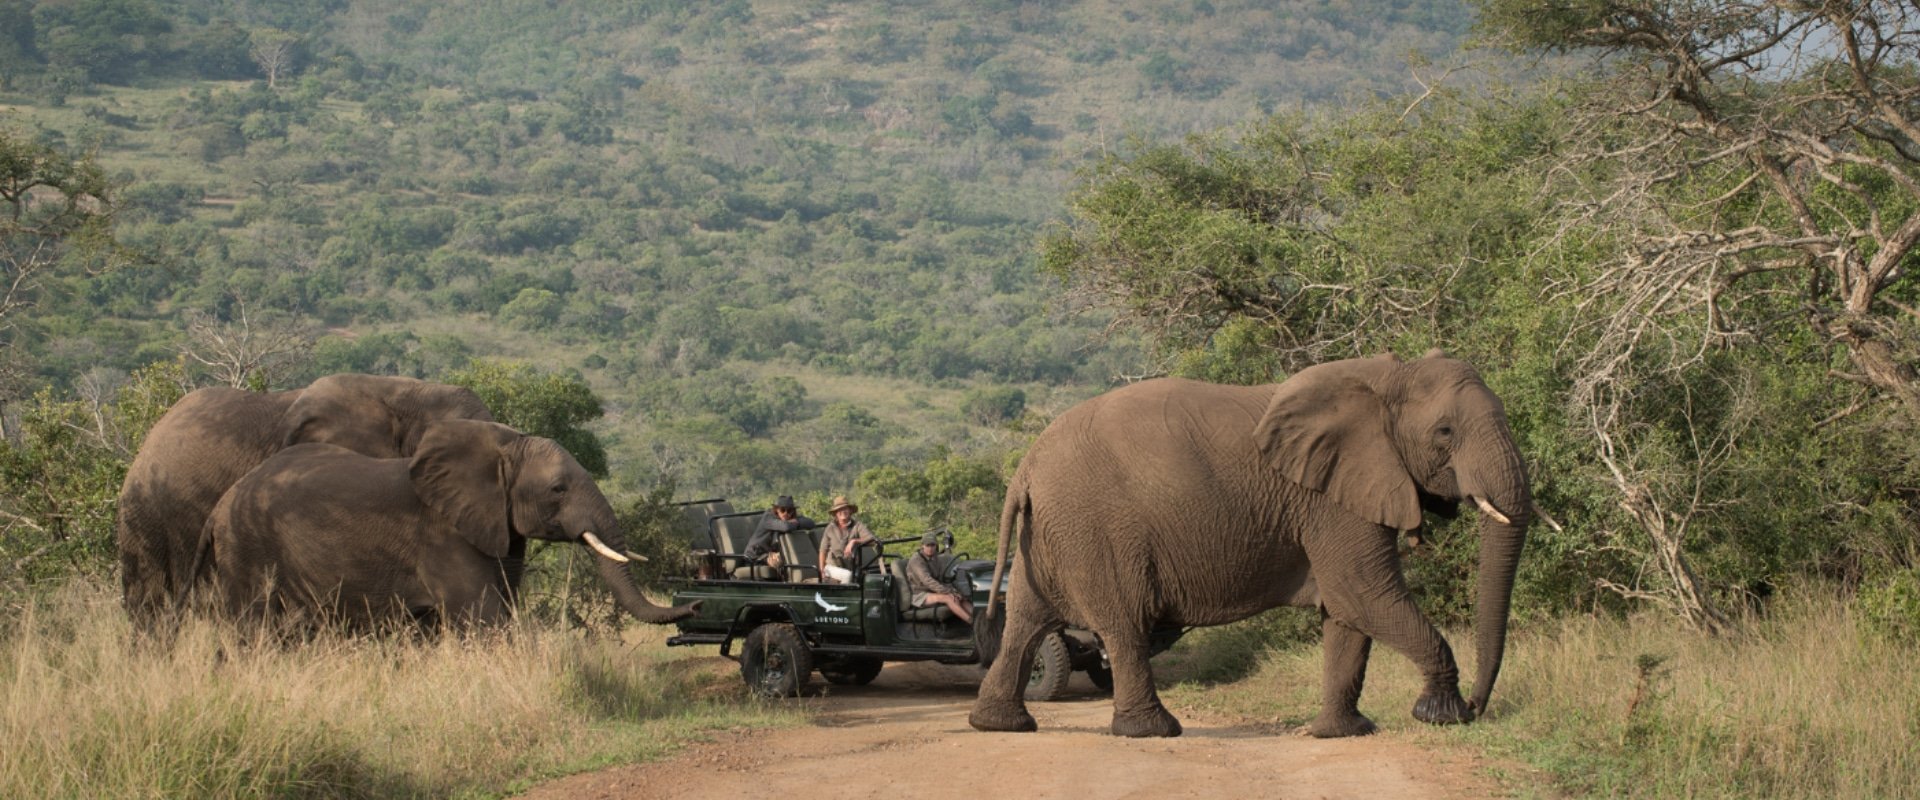 Go on a game drive